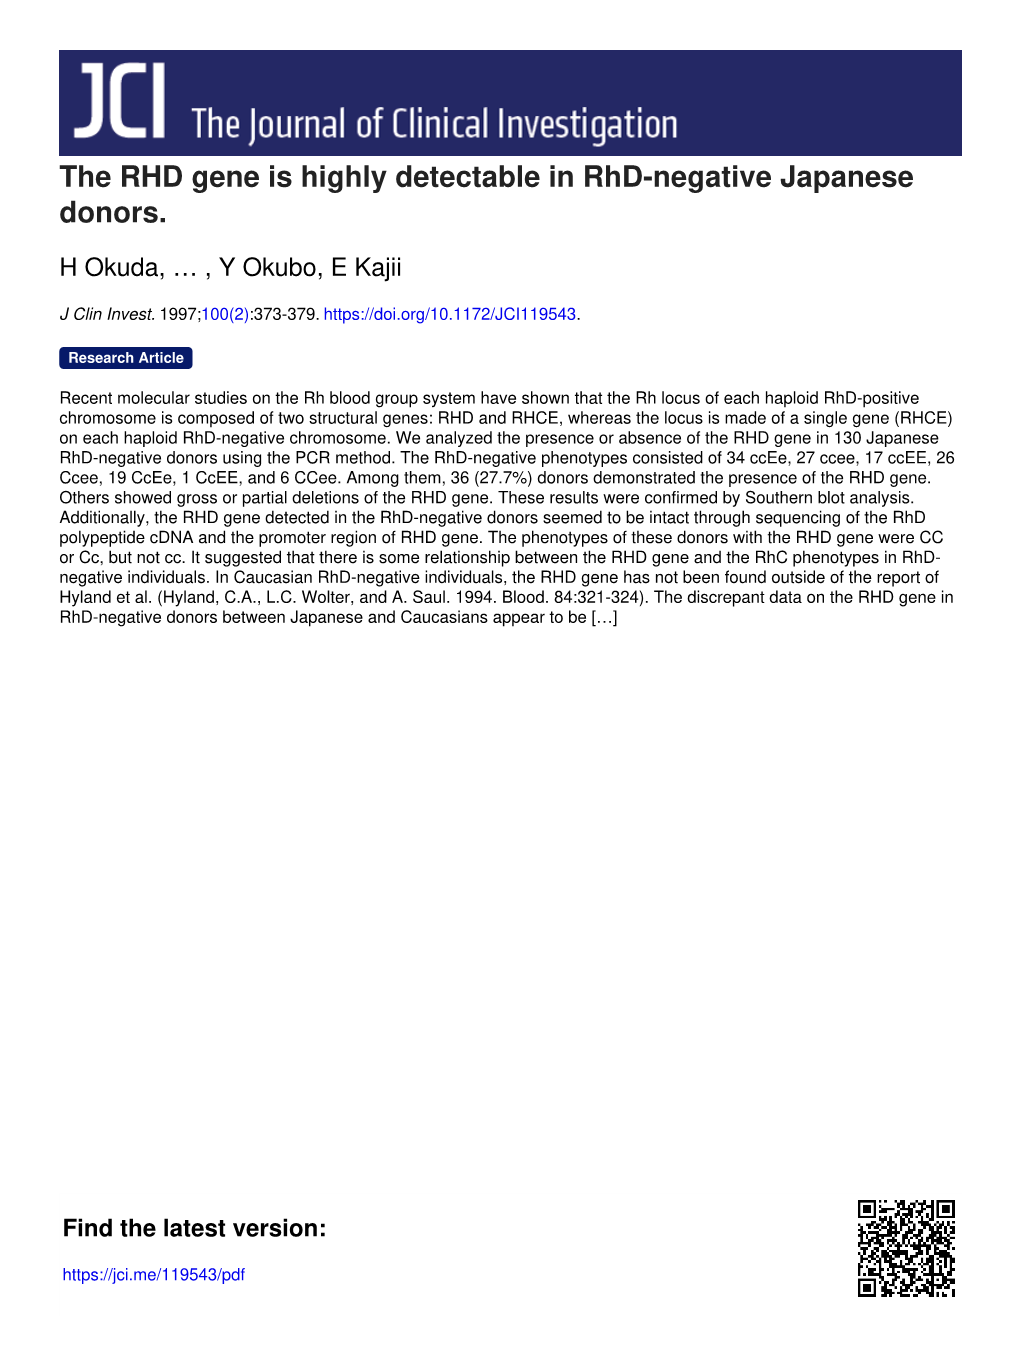 The RHD Gene Is Highly Detectable in Rhd-Negative Japanese Donors